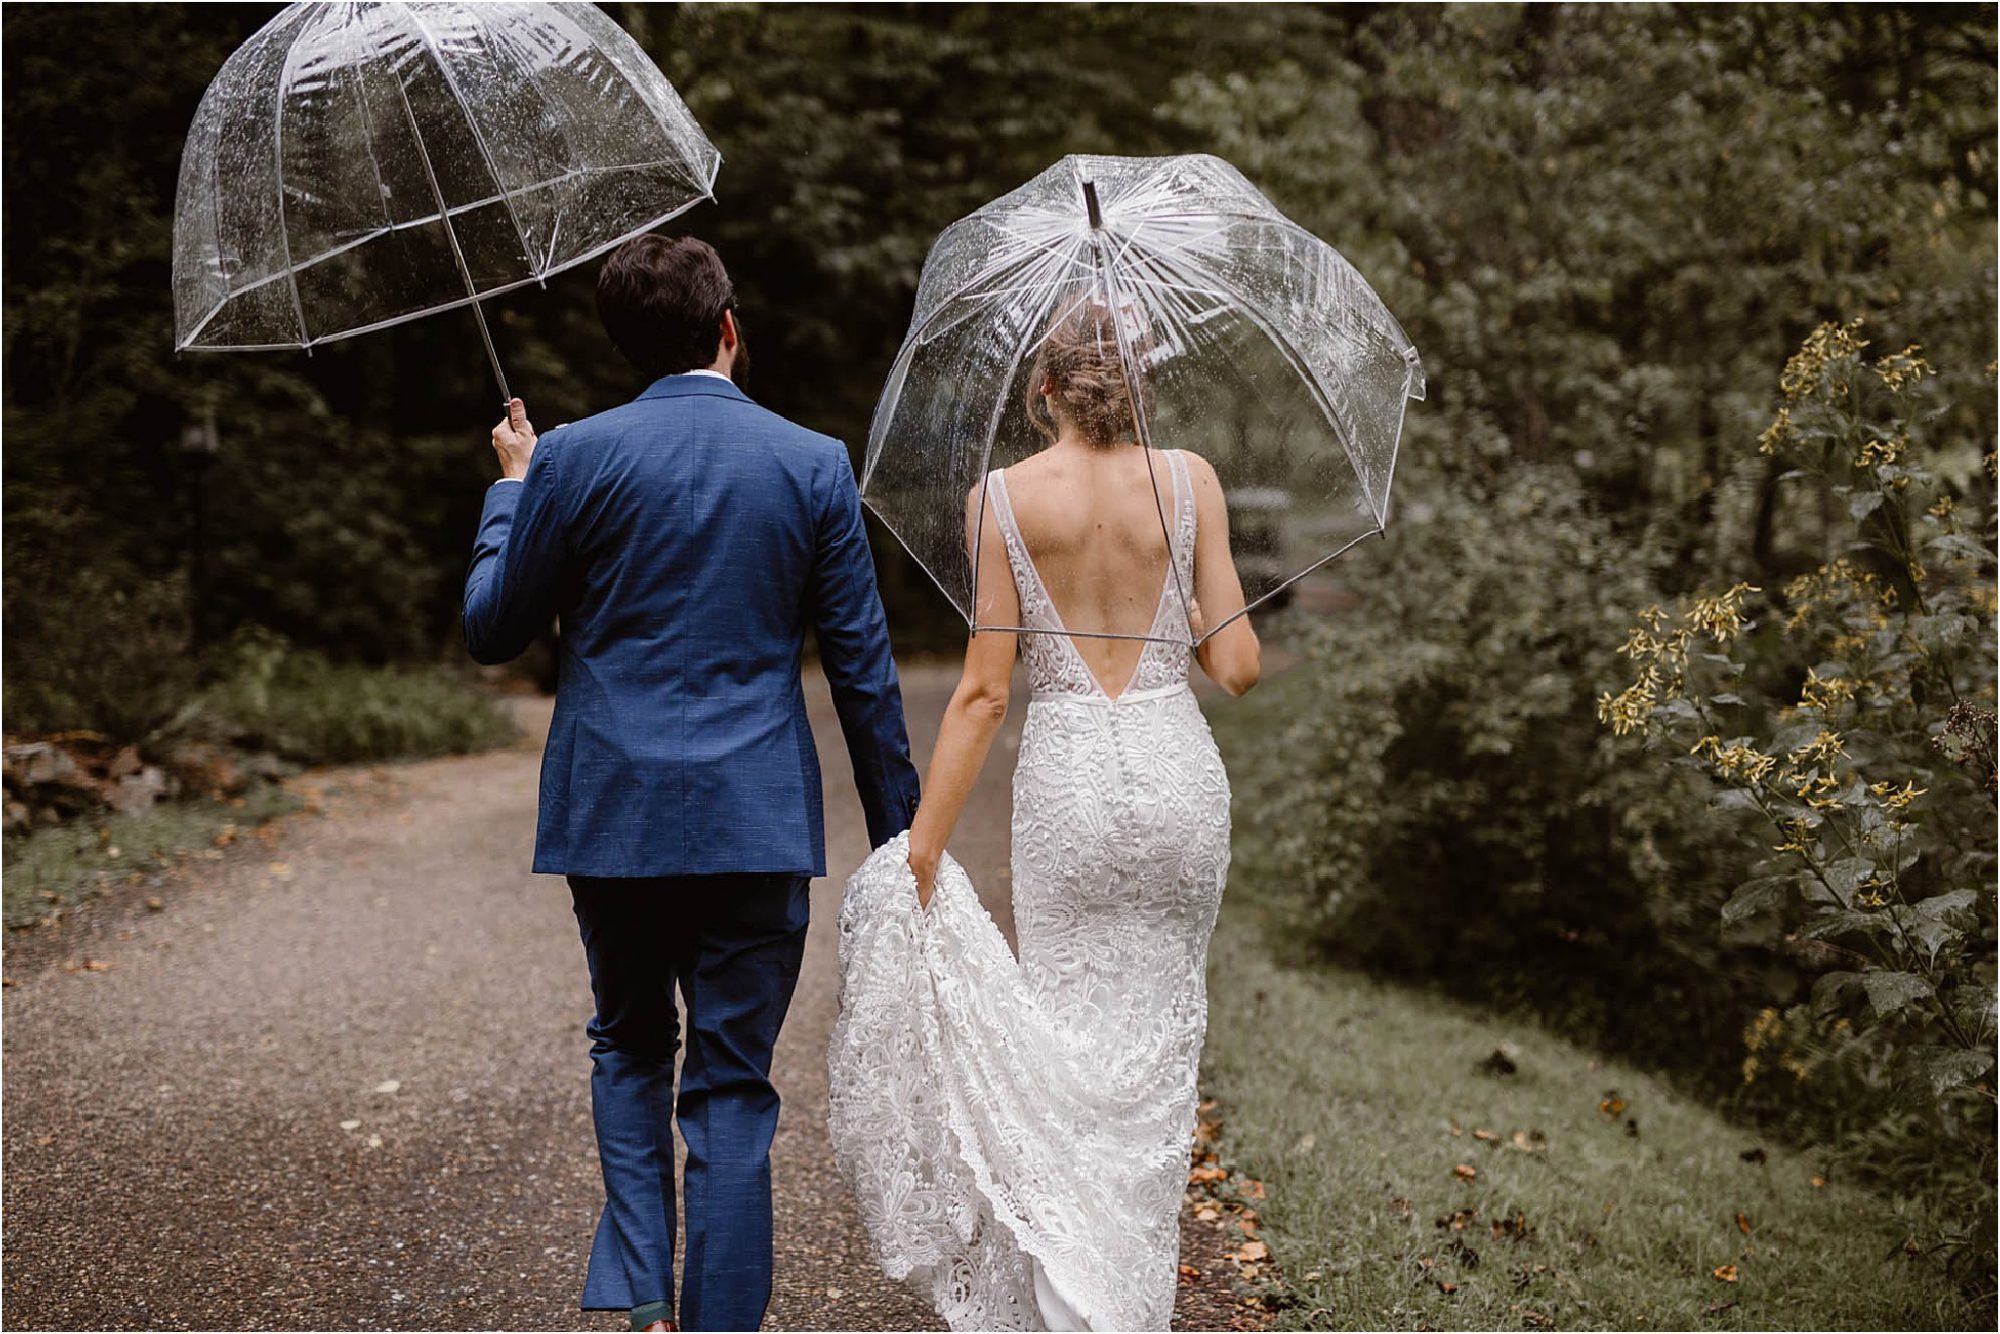 bride and groom walking with clear umbrellas on rainy wedding day